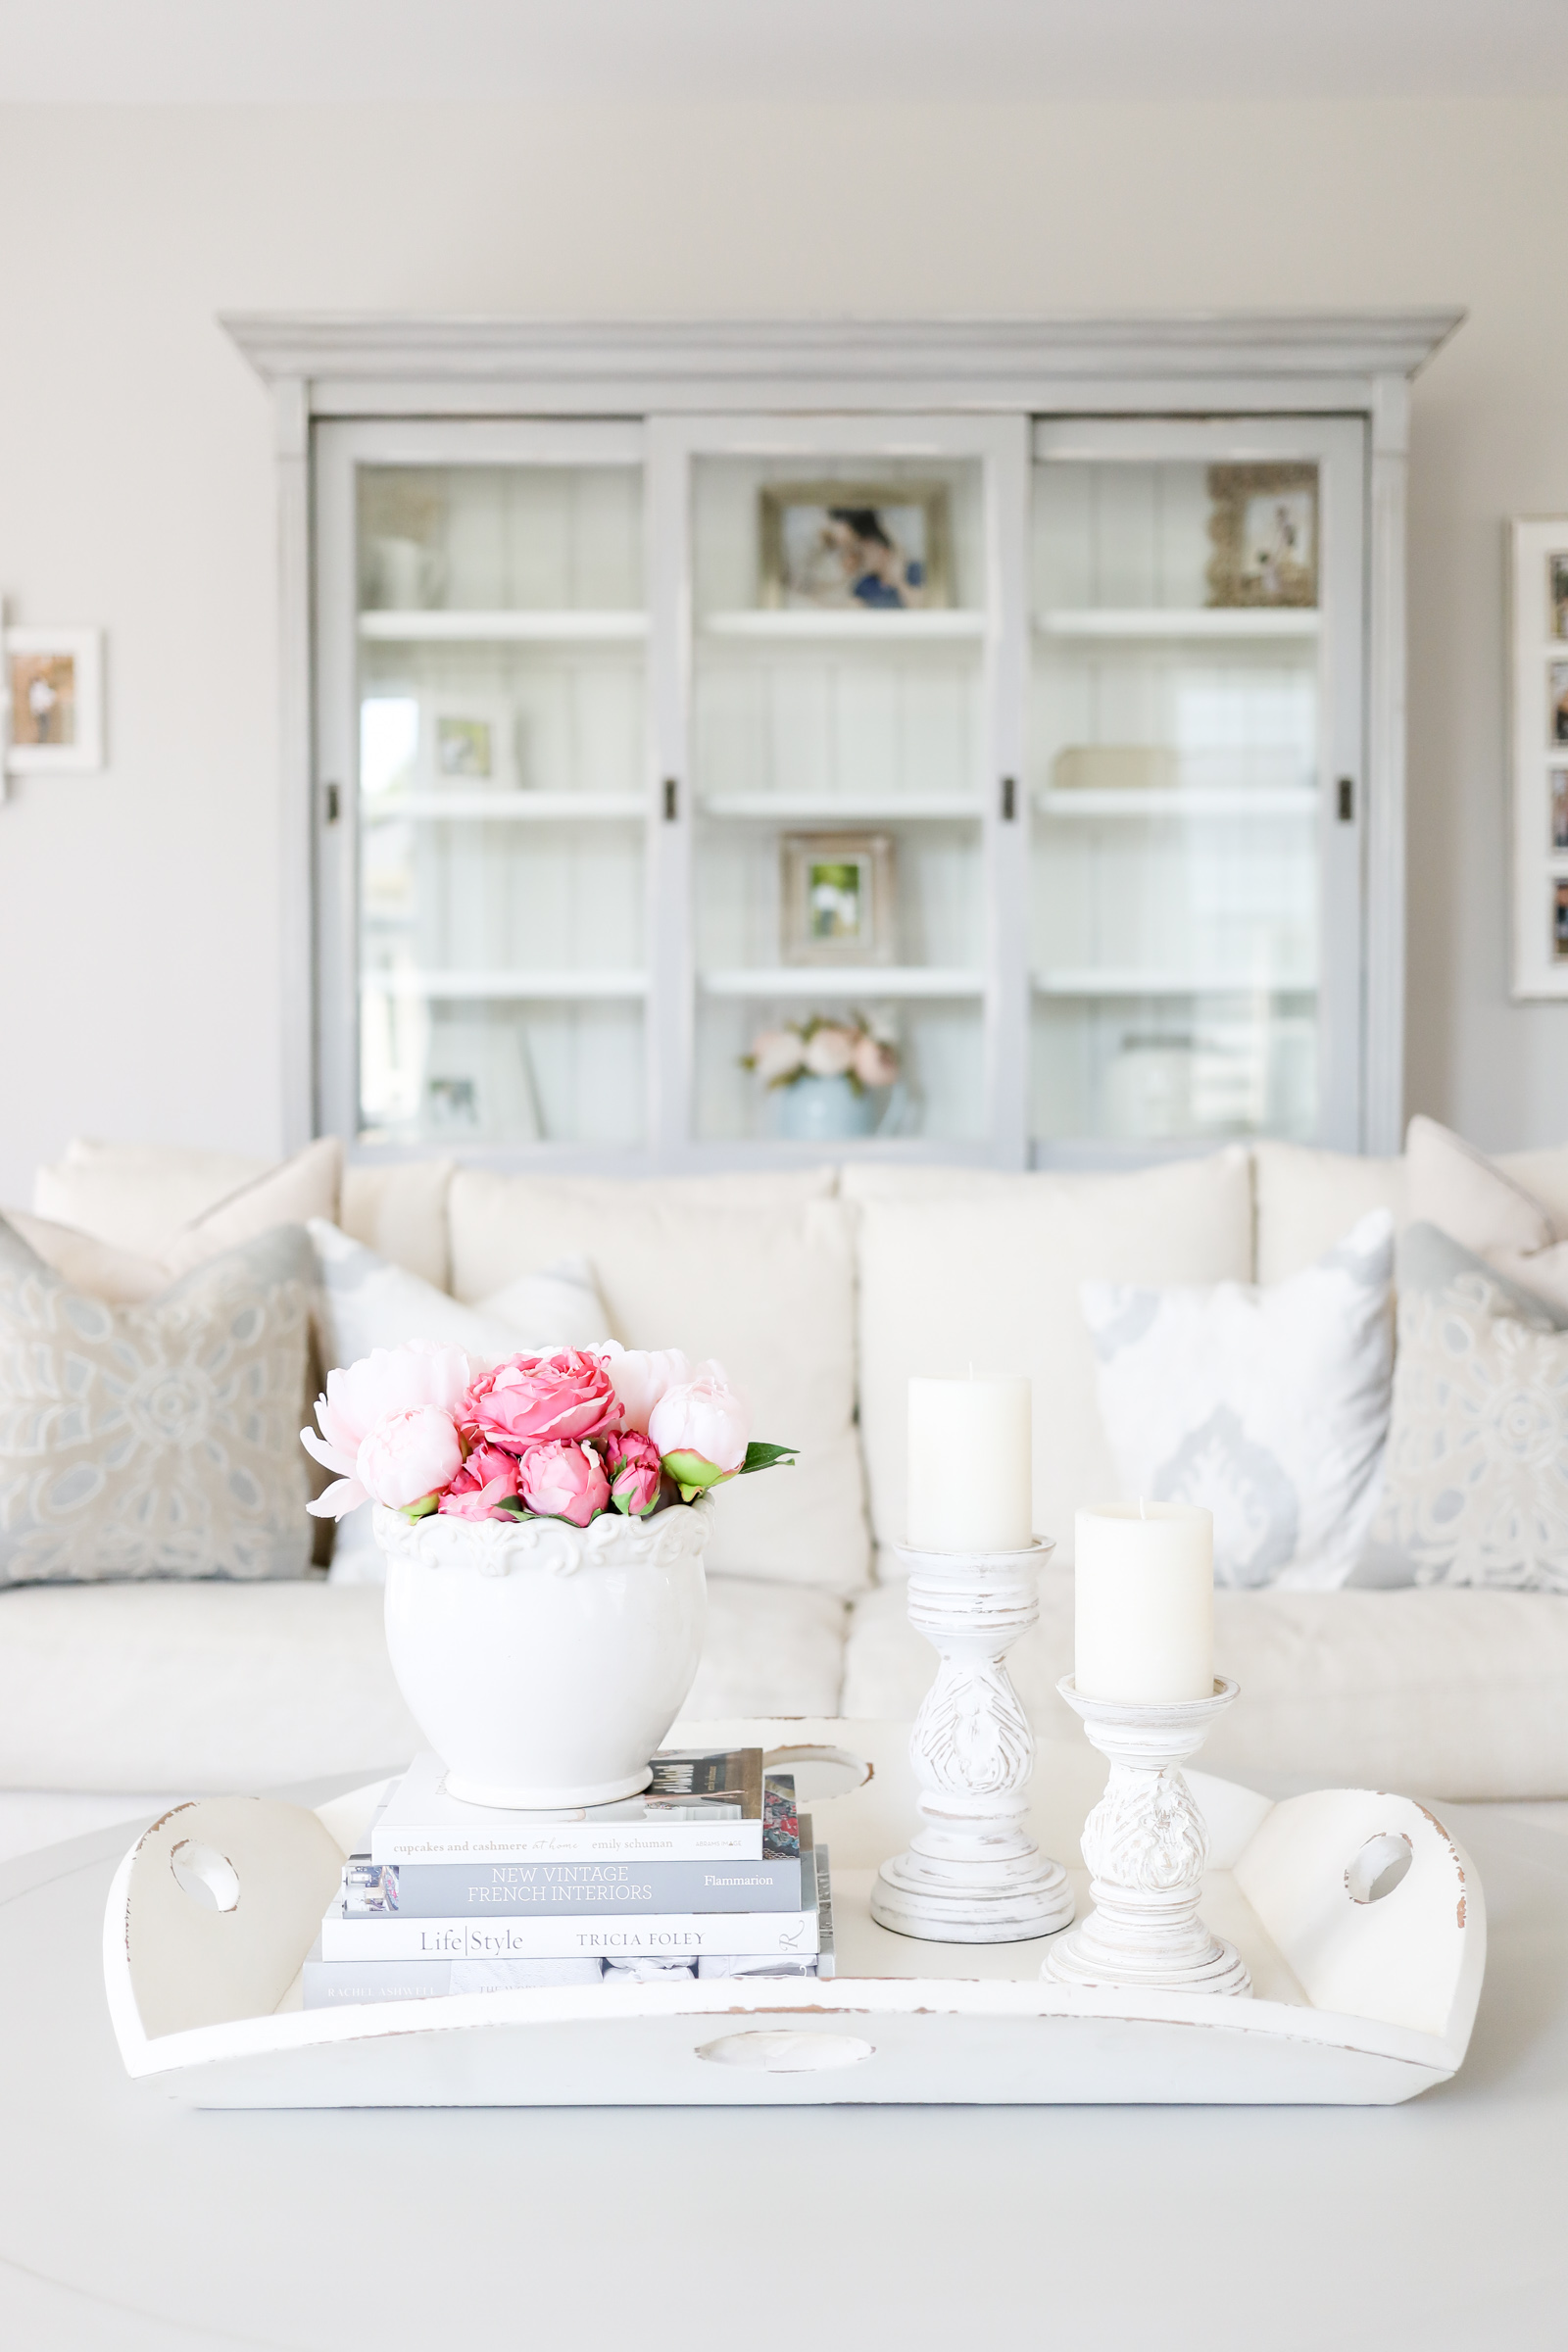 How to Decorate a Coffee Table | Pottery Barn